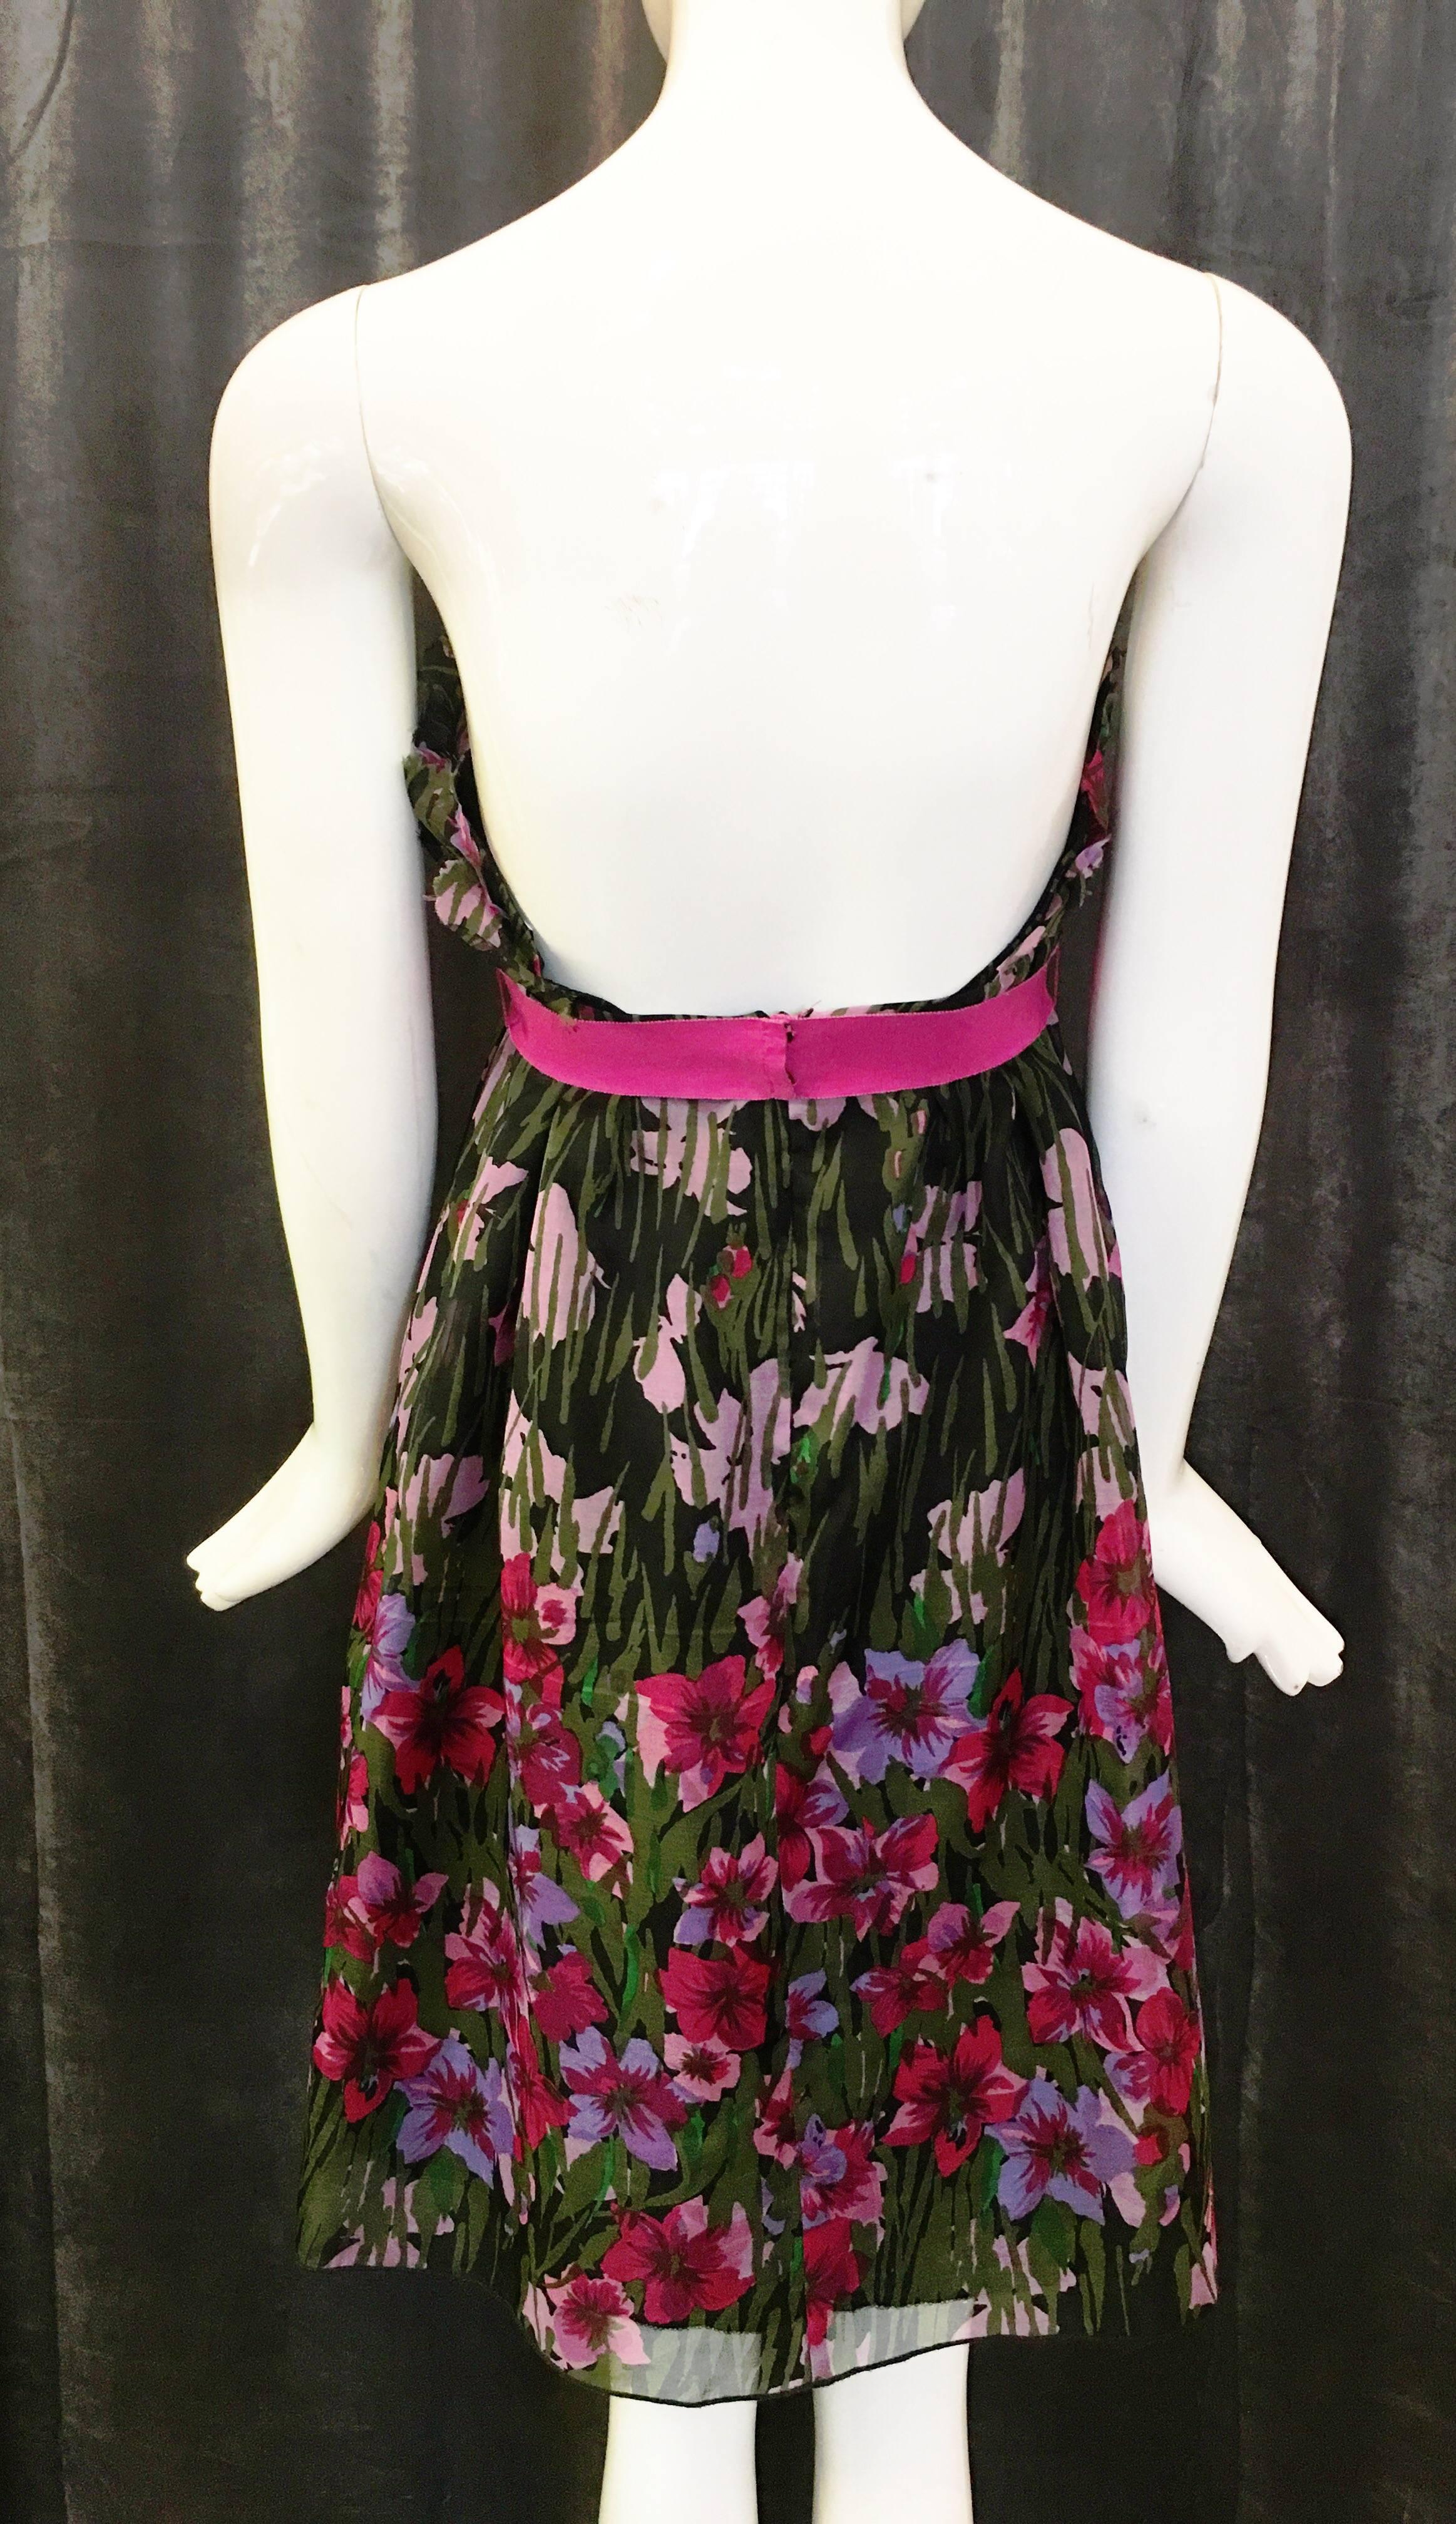 Black 1990s Anna Sui Strapless Floral Dress with Ribbon